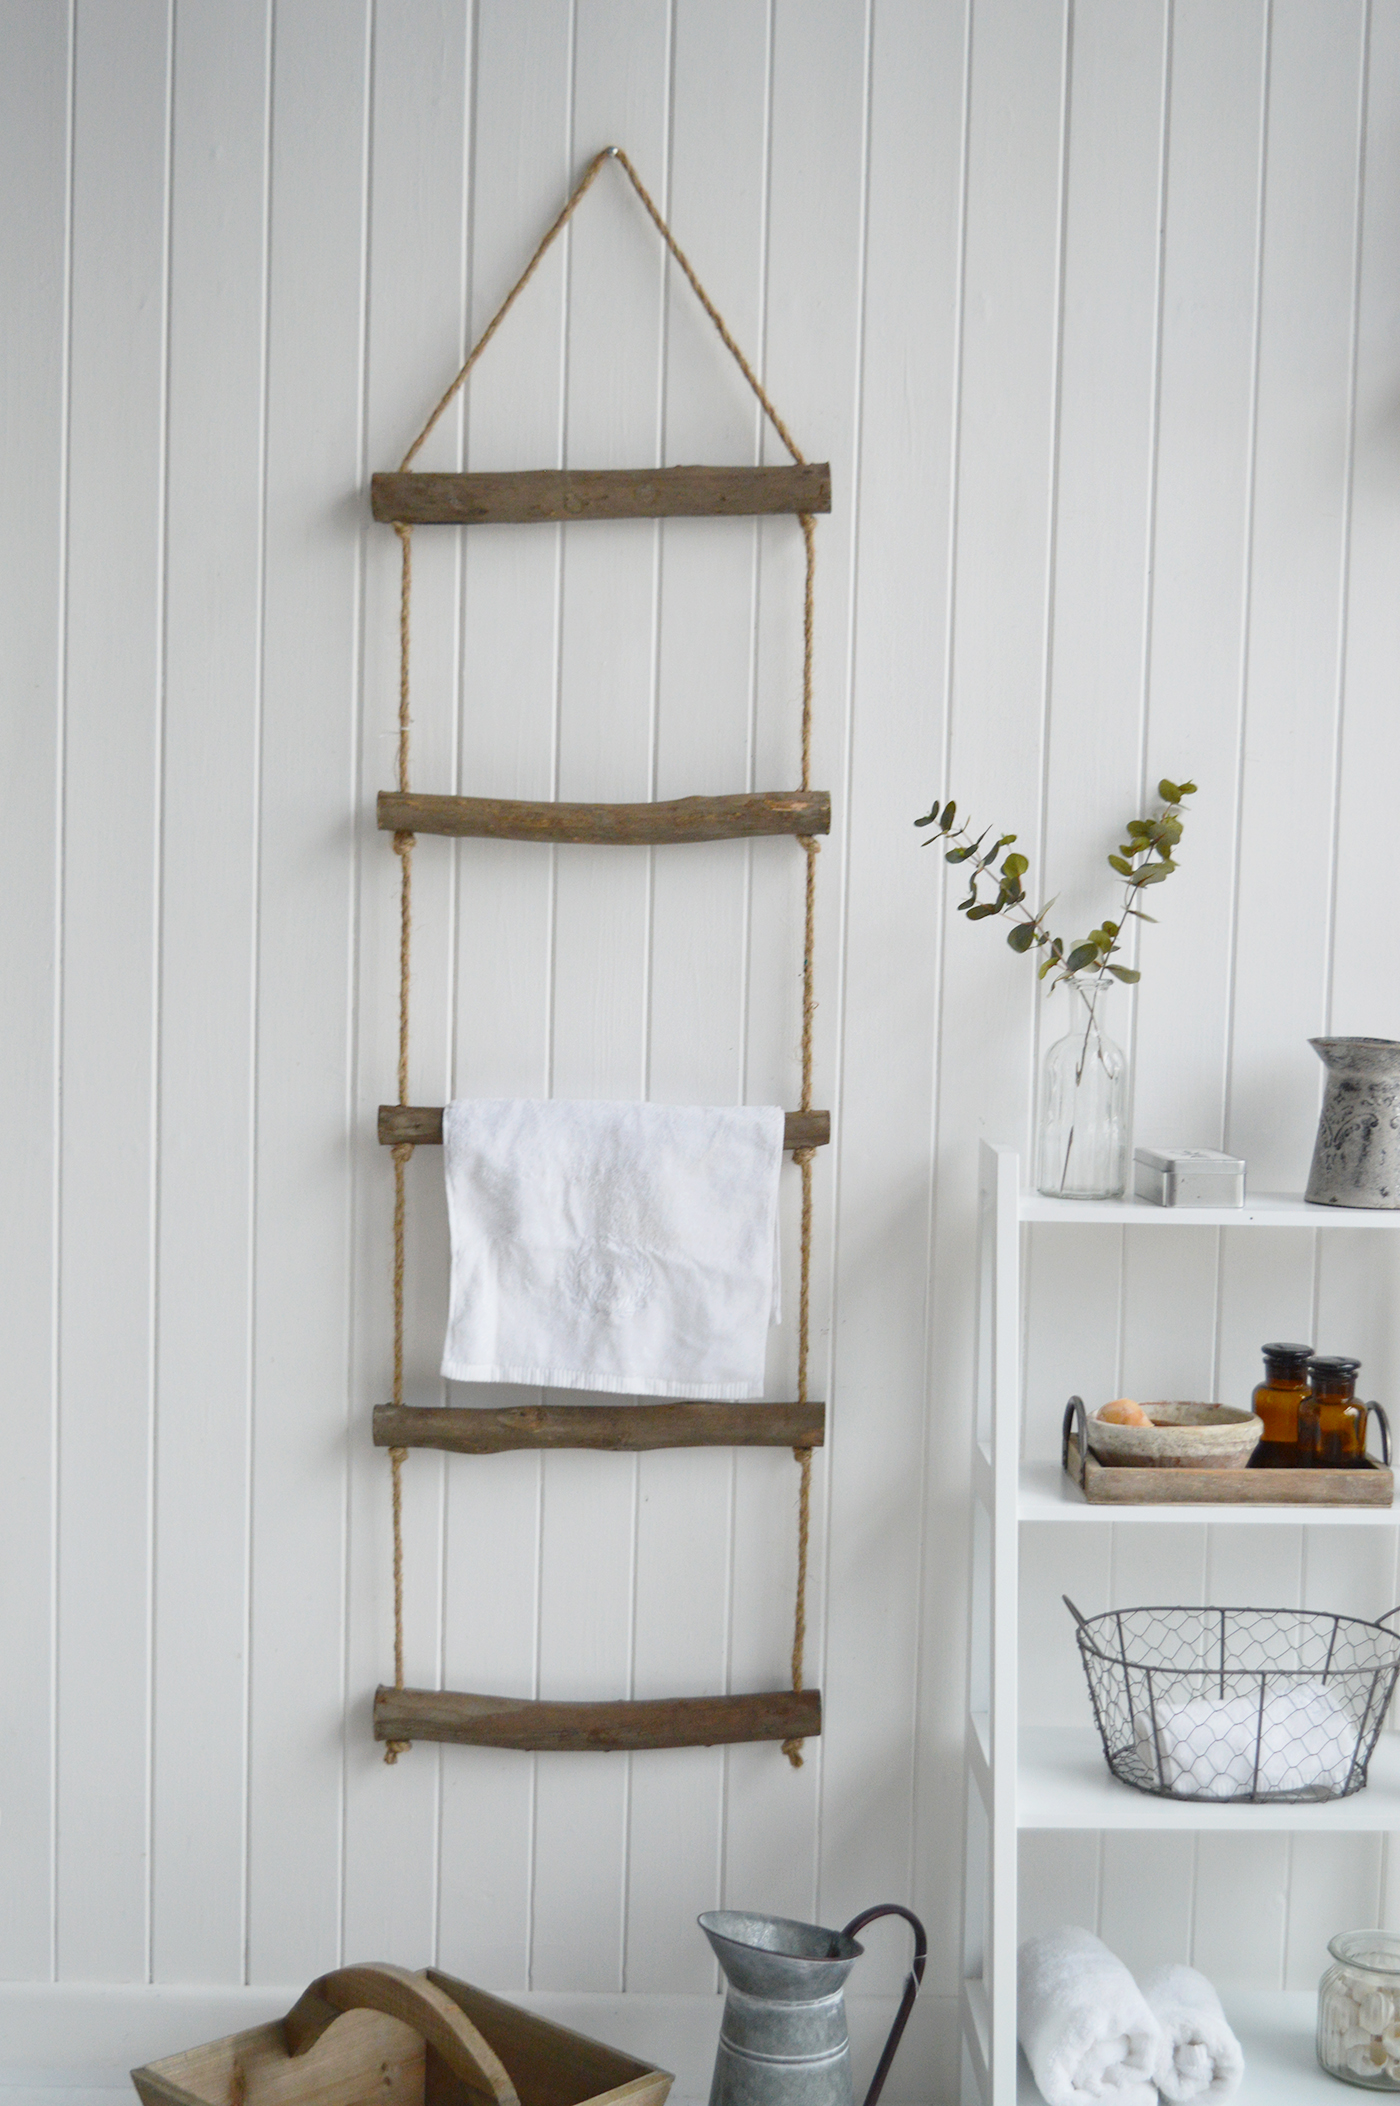 A rope towel ladder to hang towels in bathroom or blanket ladder for the living room. from The White Lighthouse Furniture , New England interiors and furniture for the hallway, living room, bedroom and bathroom